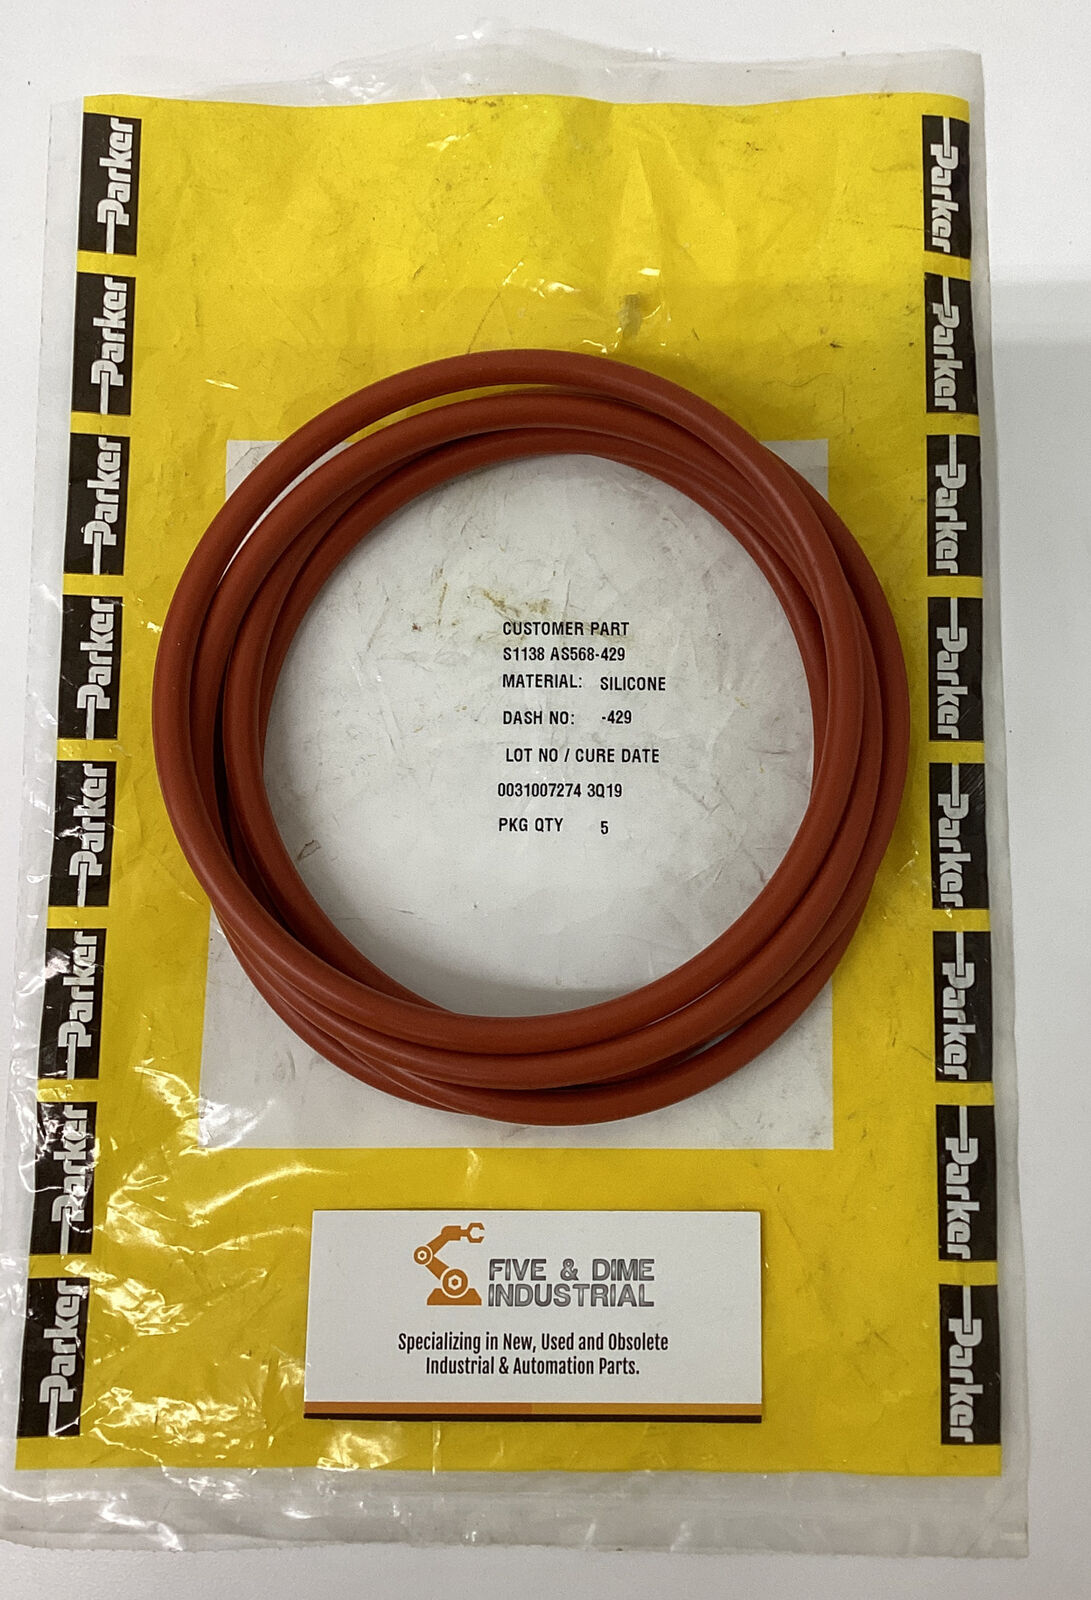 Parker  S1138-AS568-429 / 429  Bag of (5)  Silicone O-Rings (YE205)